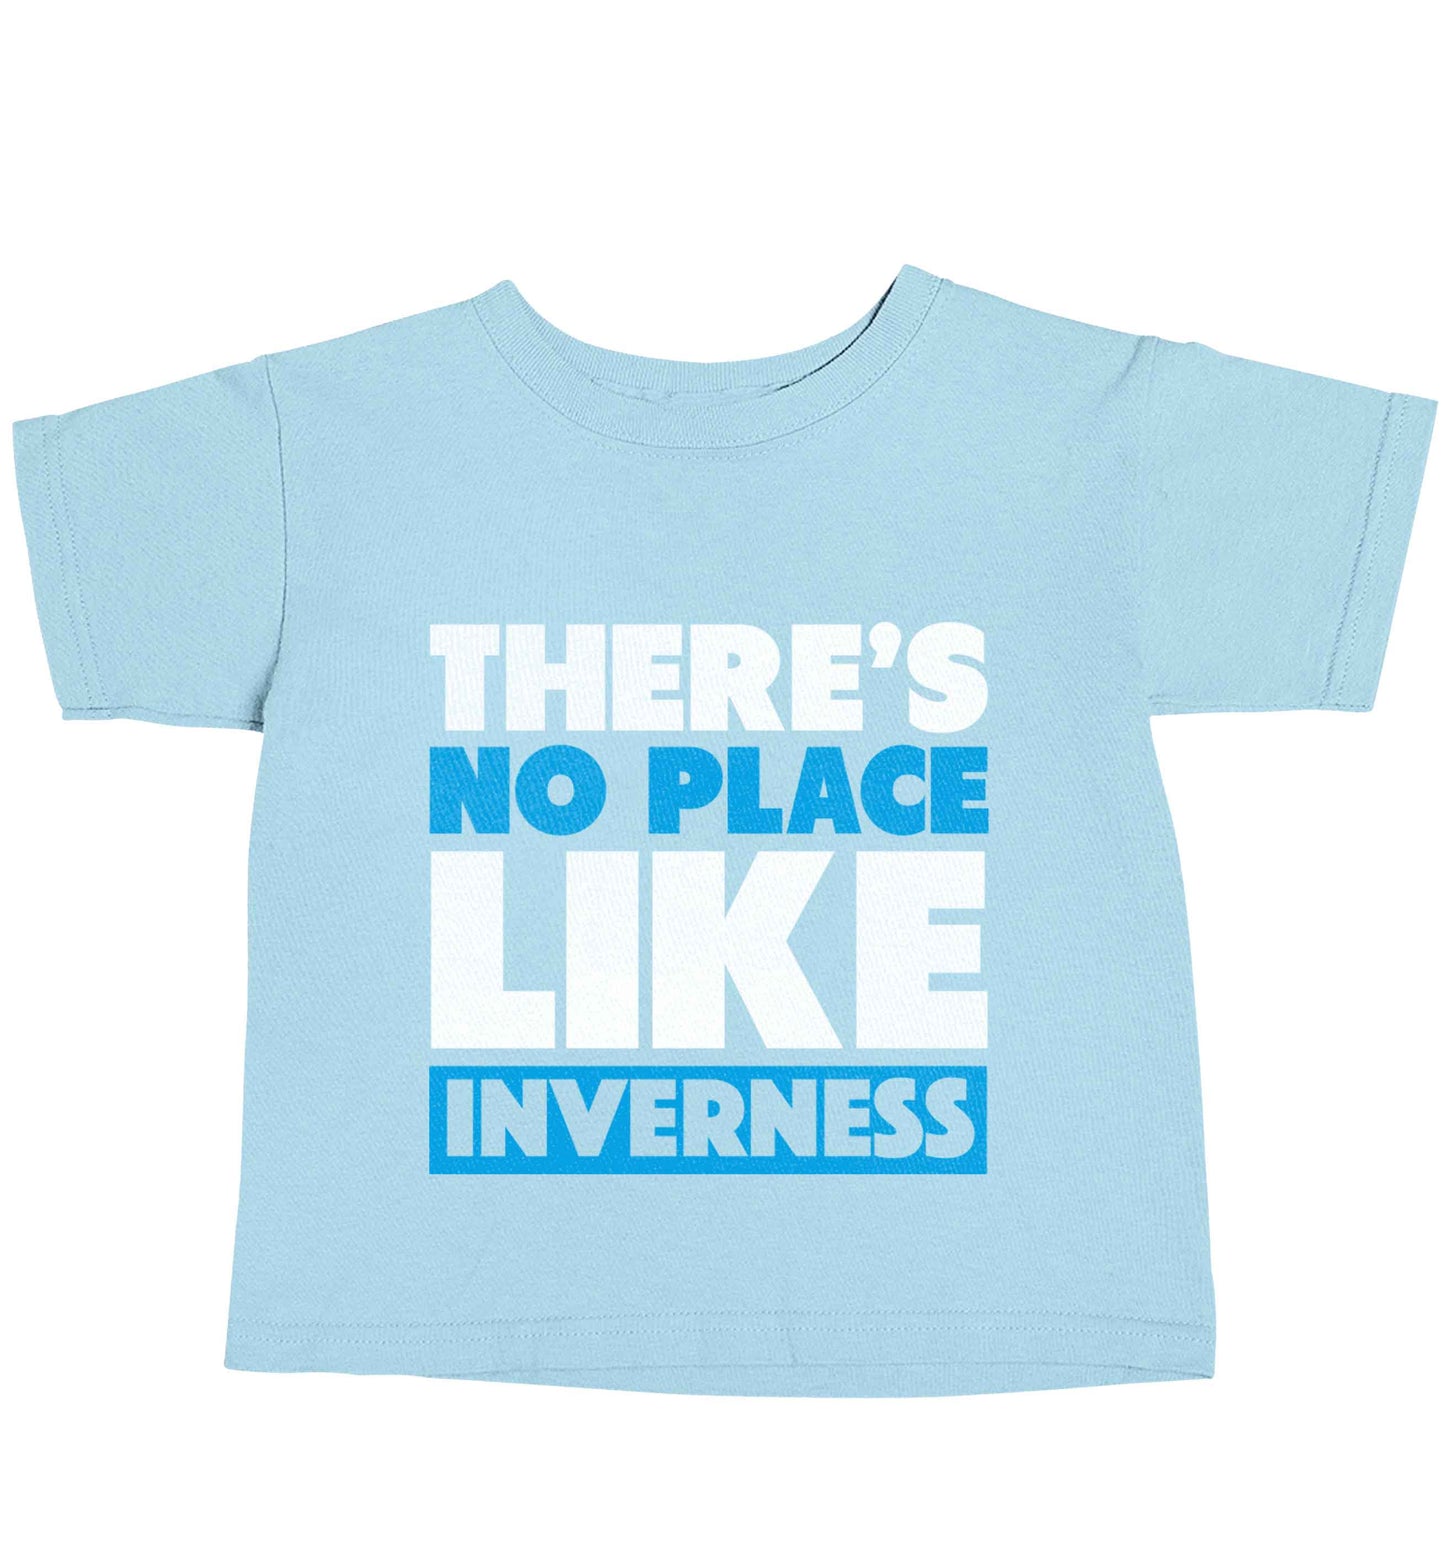 There's no place like Inverness light blue baby toddler Tshirt 2 Years